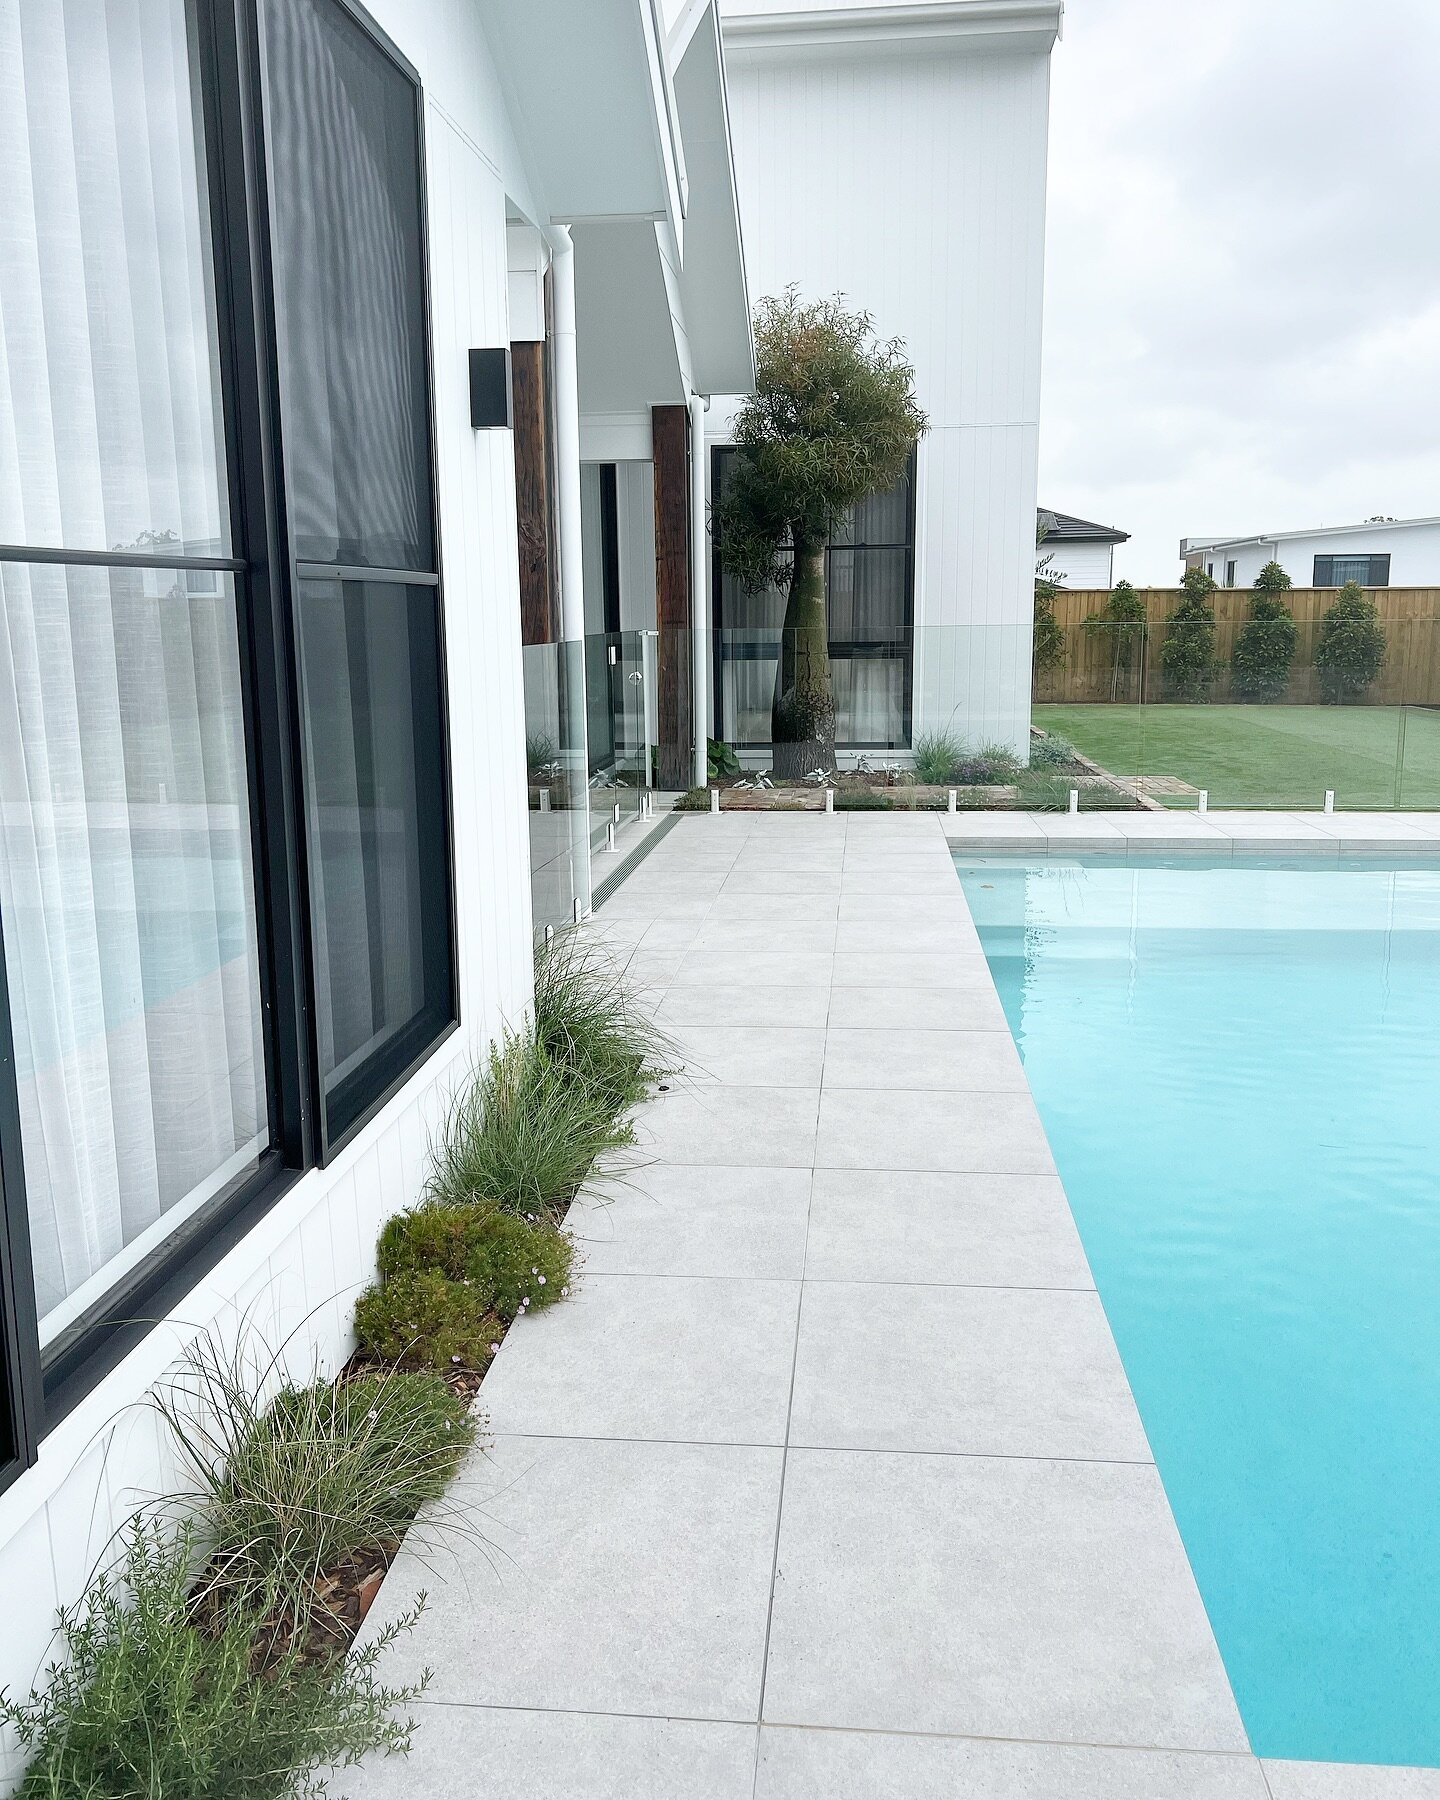 Uncomplicated modern design and clean lines. 

Porcelain tiles, pops of recycled brick, green green grass, white spigots and that big beautiful Boab tree the focal point from inside and outside the home. 

Pool + Landscaping: @outsideindulgence_lands